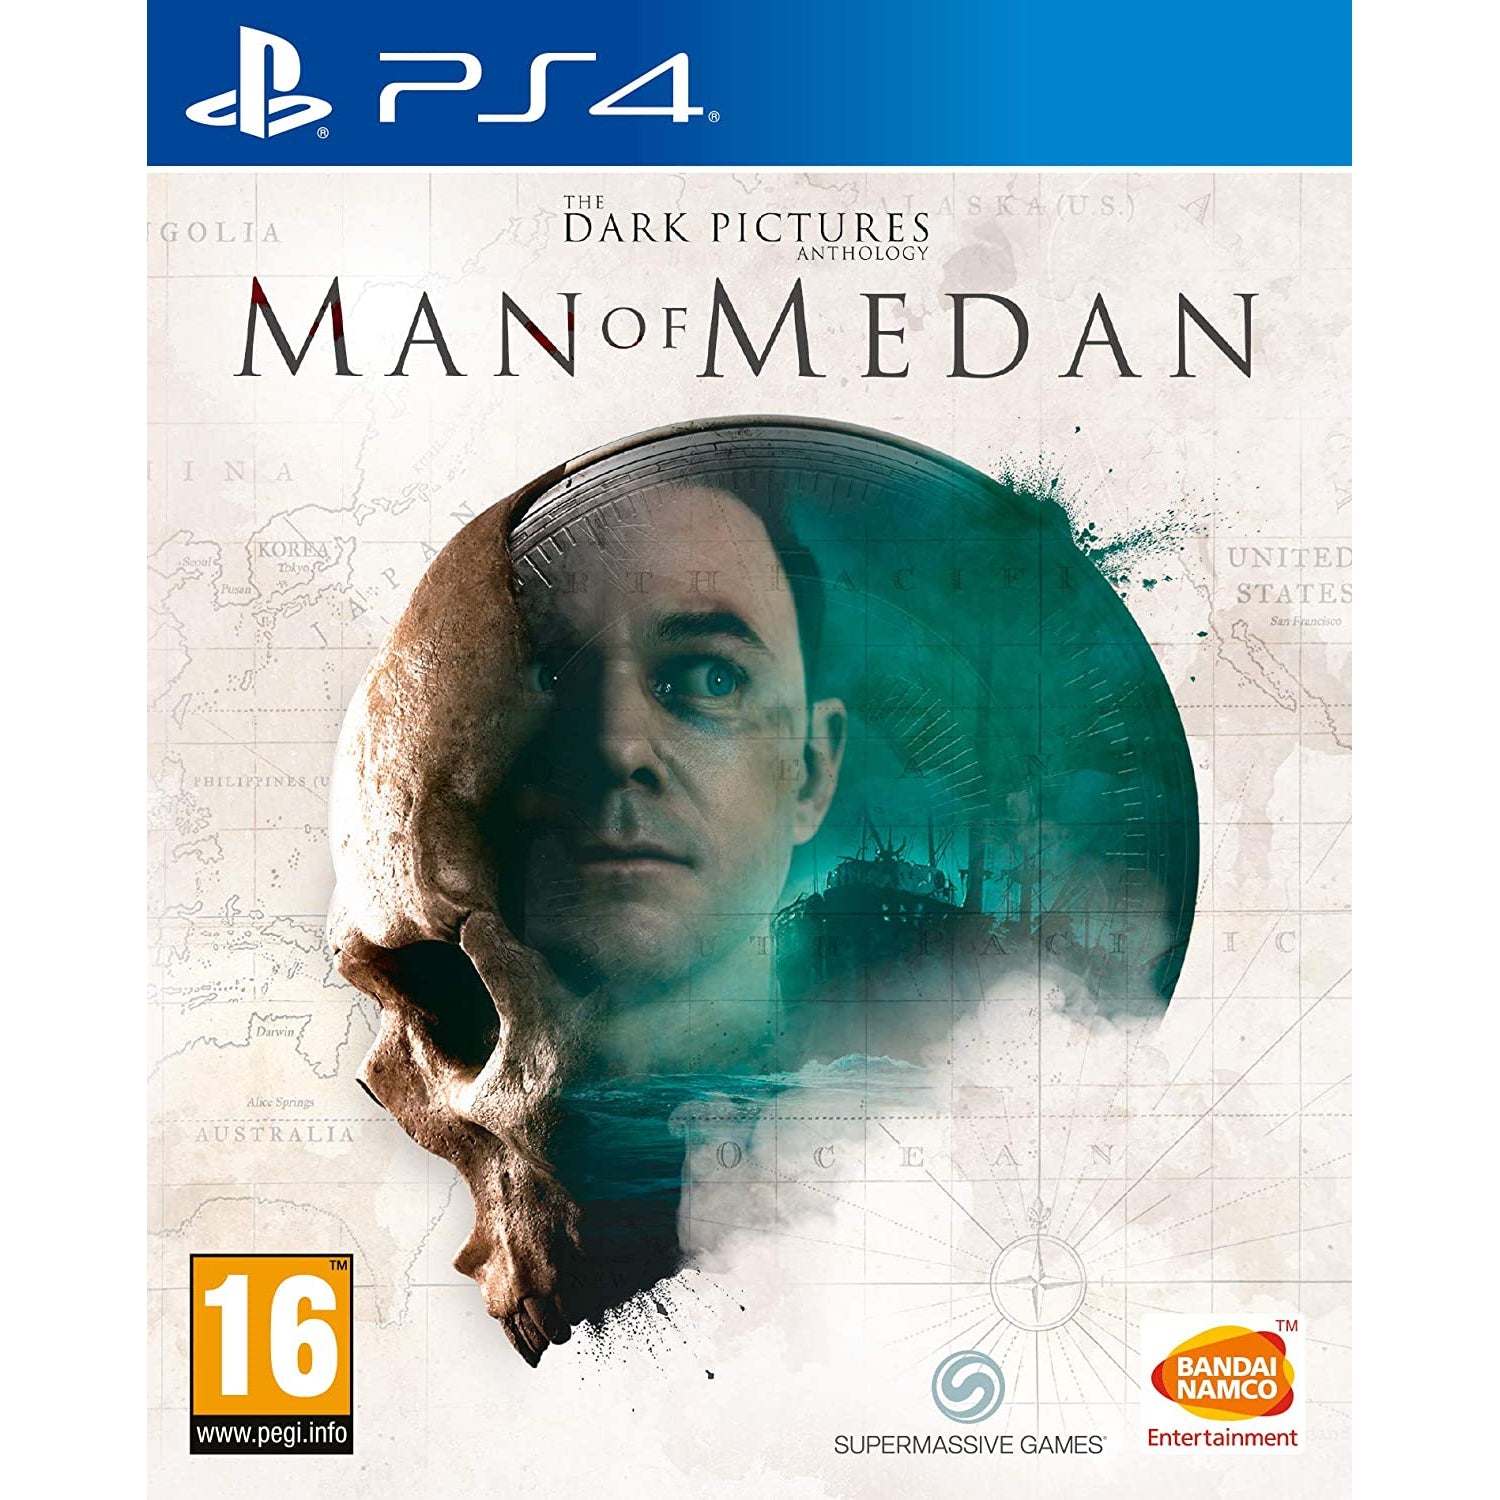 The Dark Pictures Anthology Man of Medan (PS4)